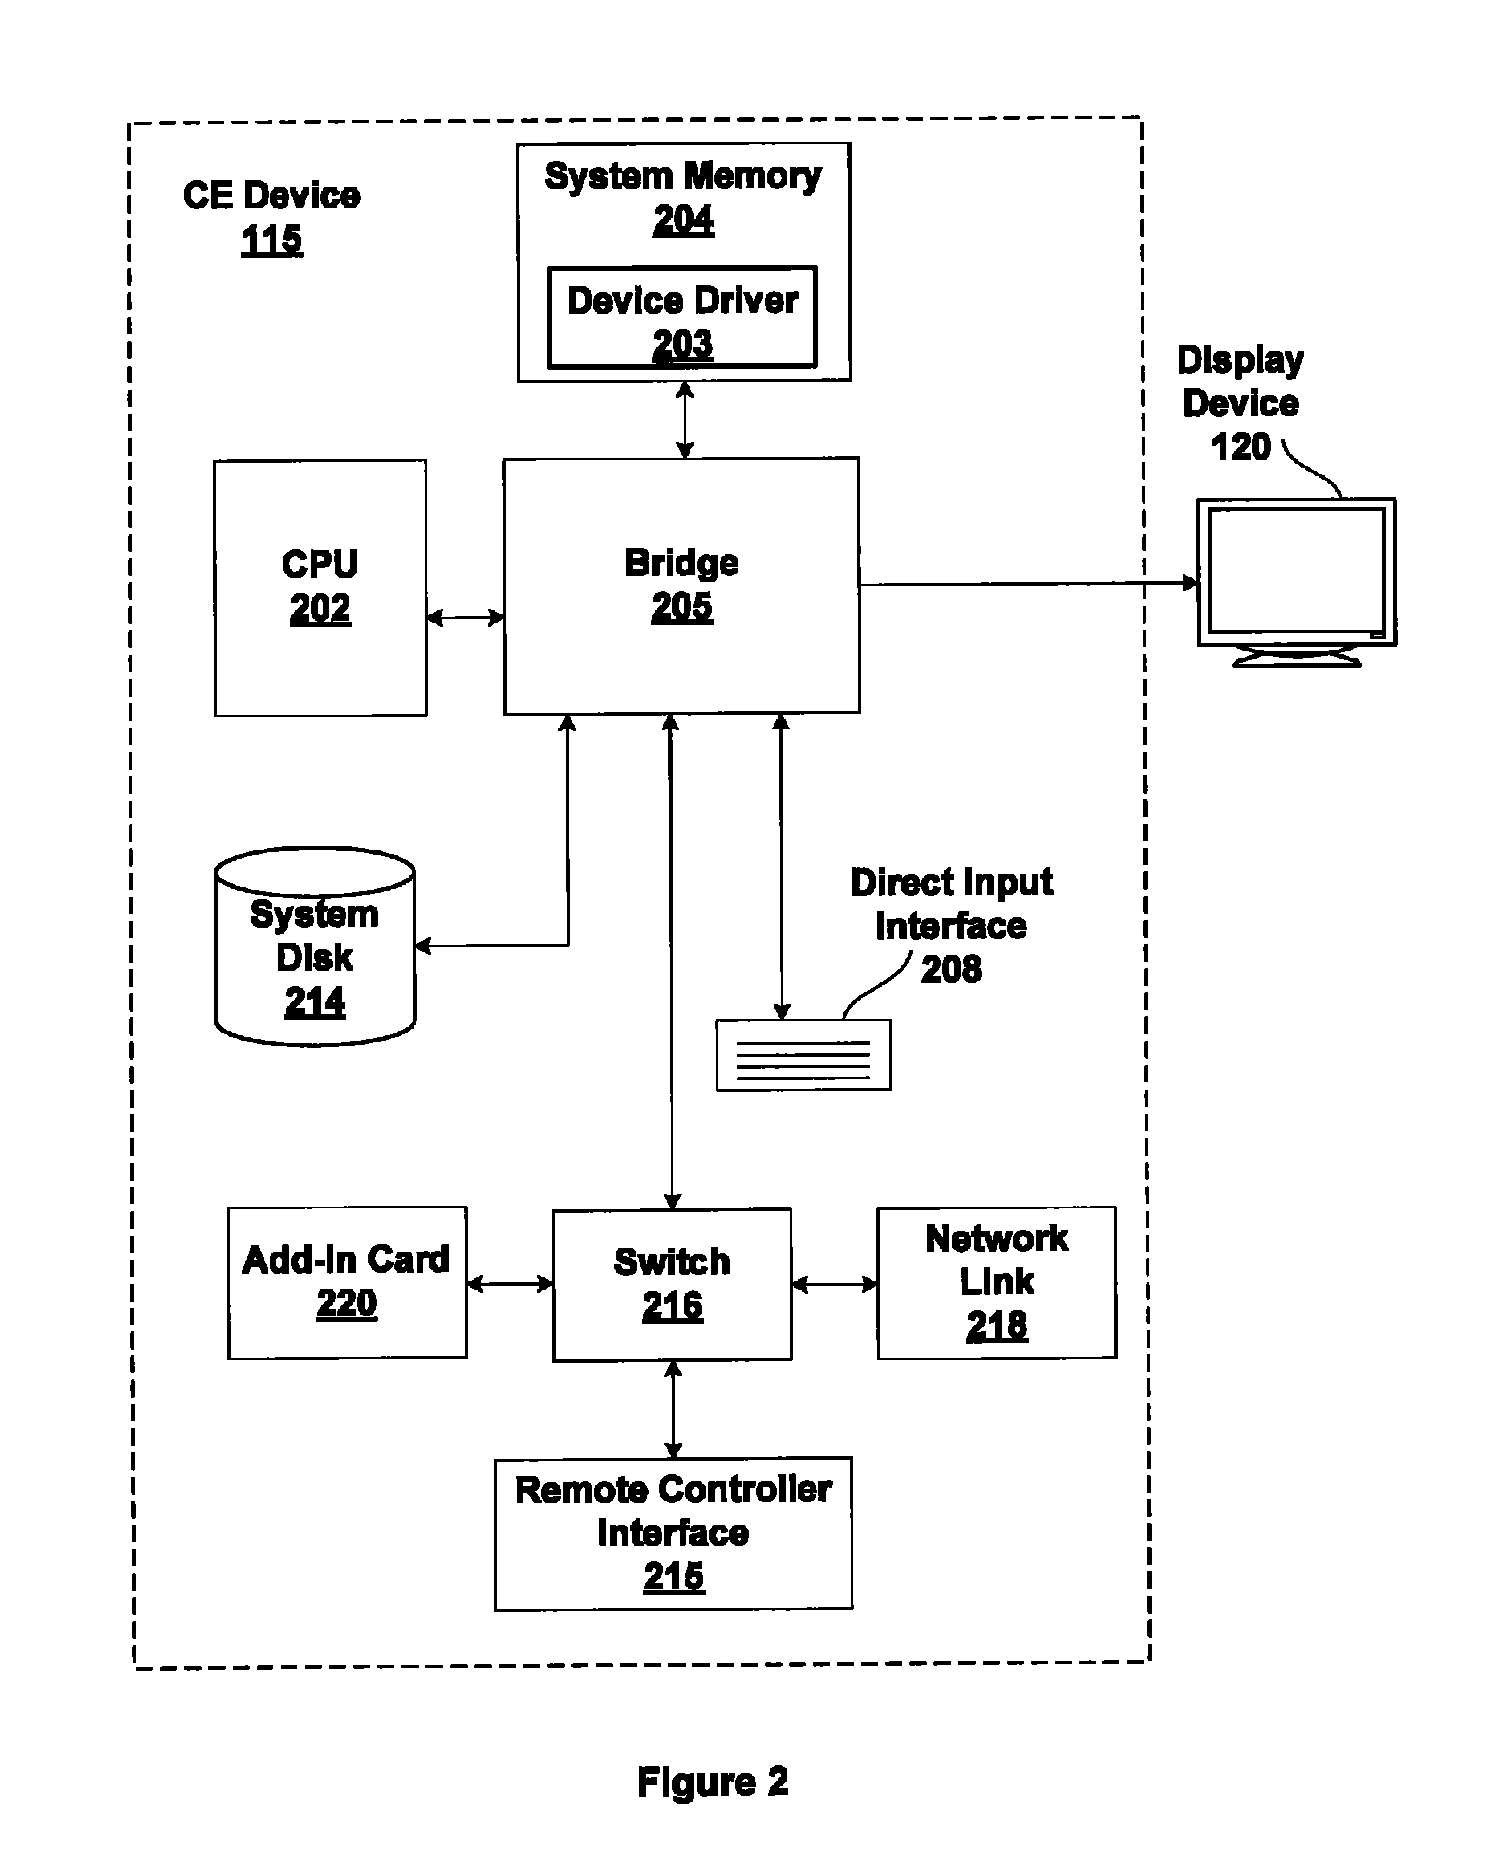 User interface for a remote control device